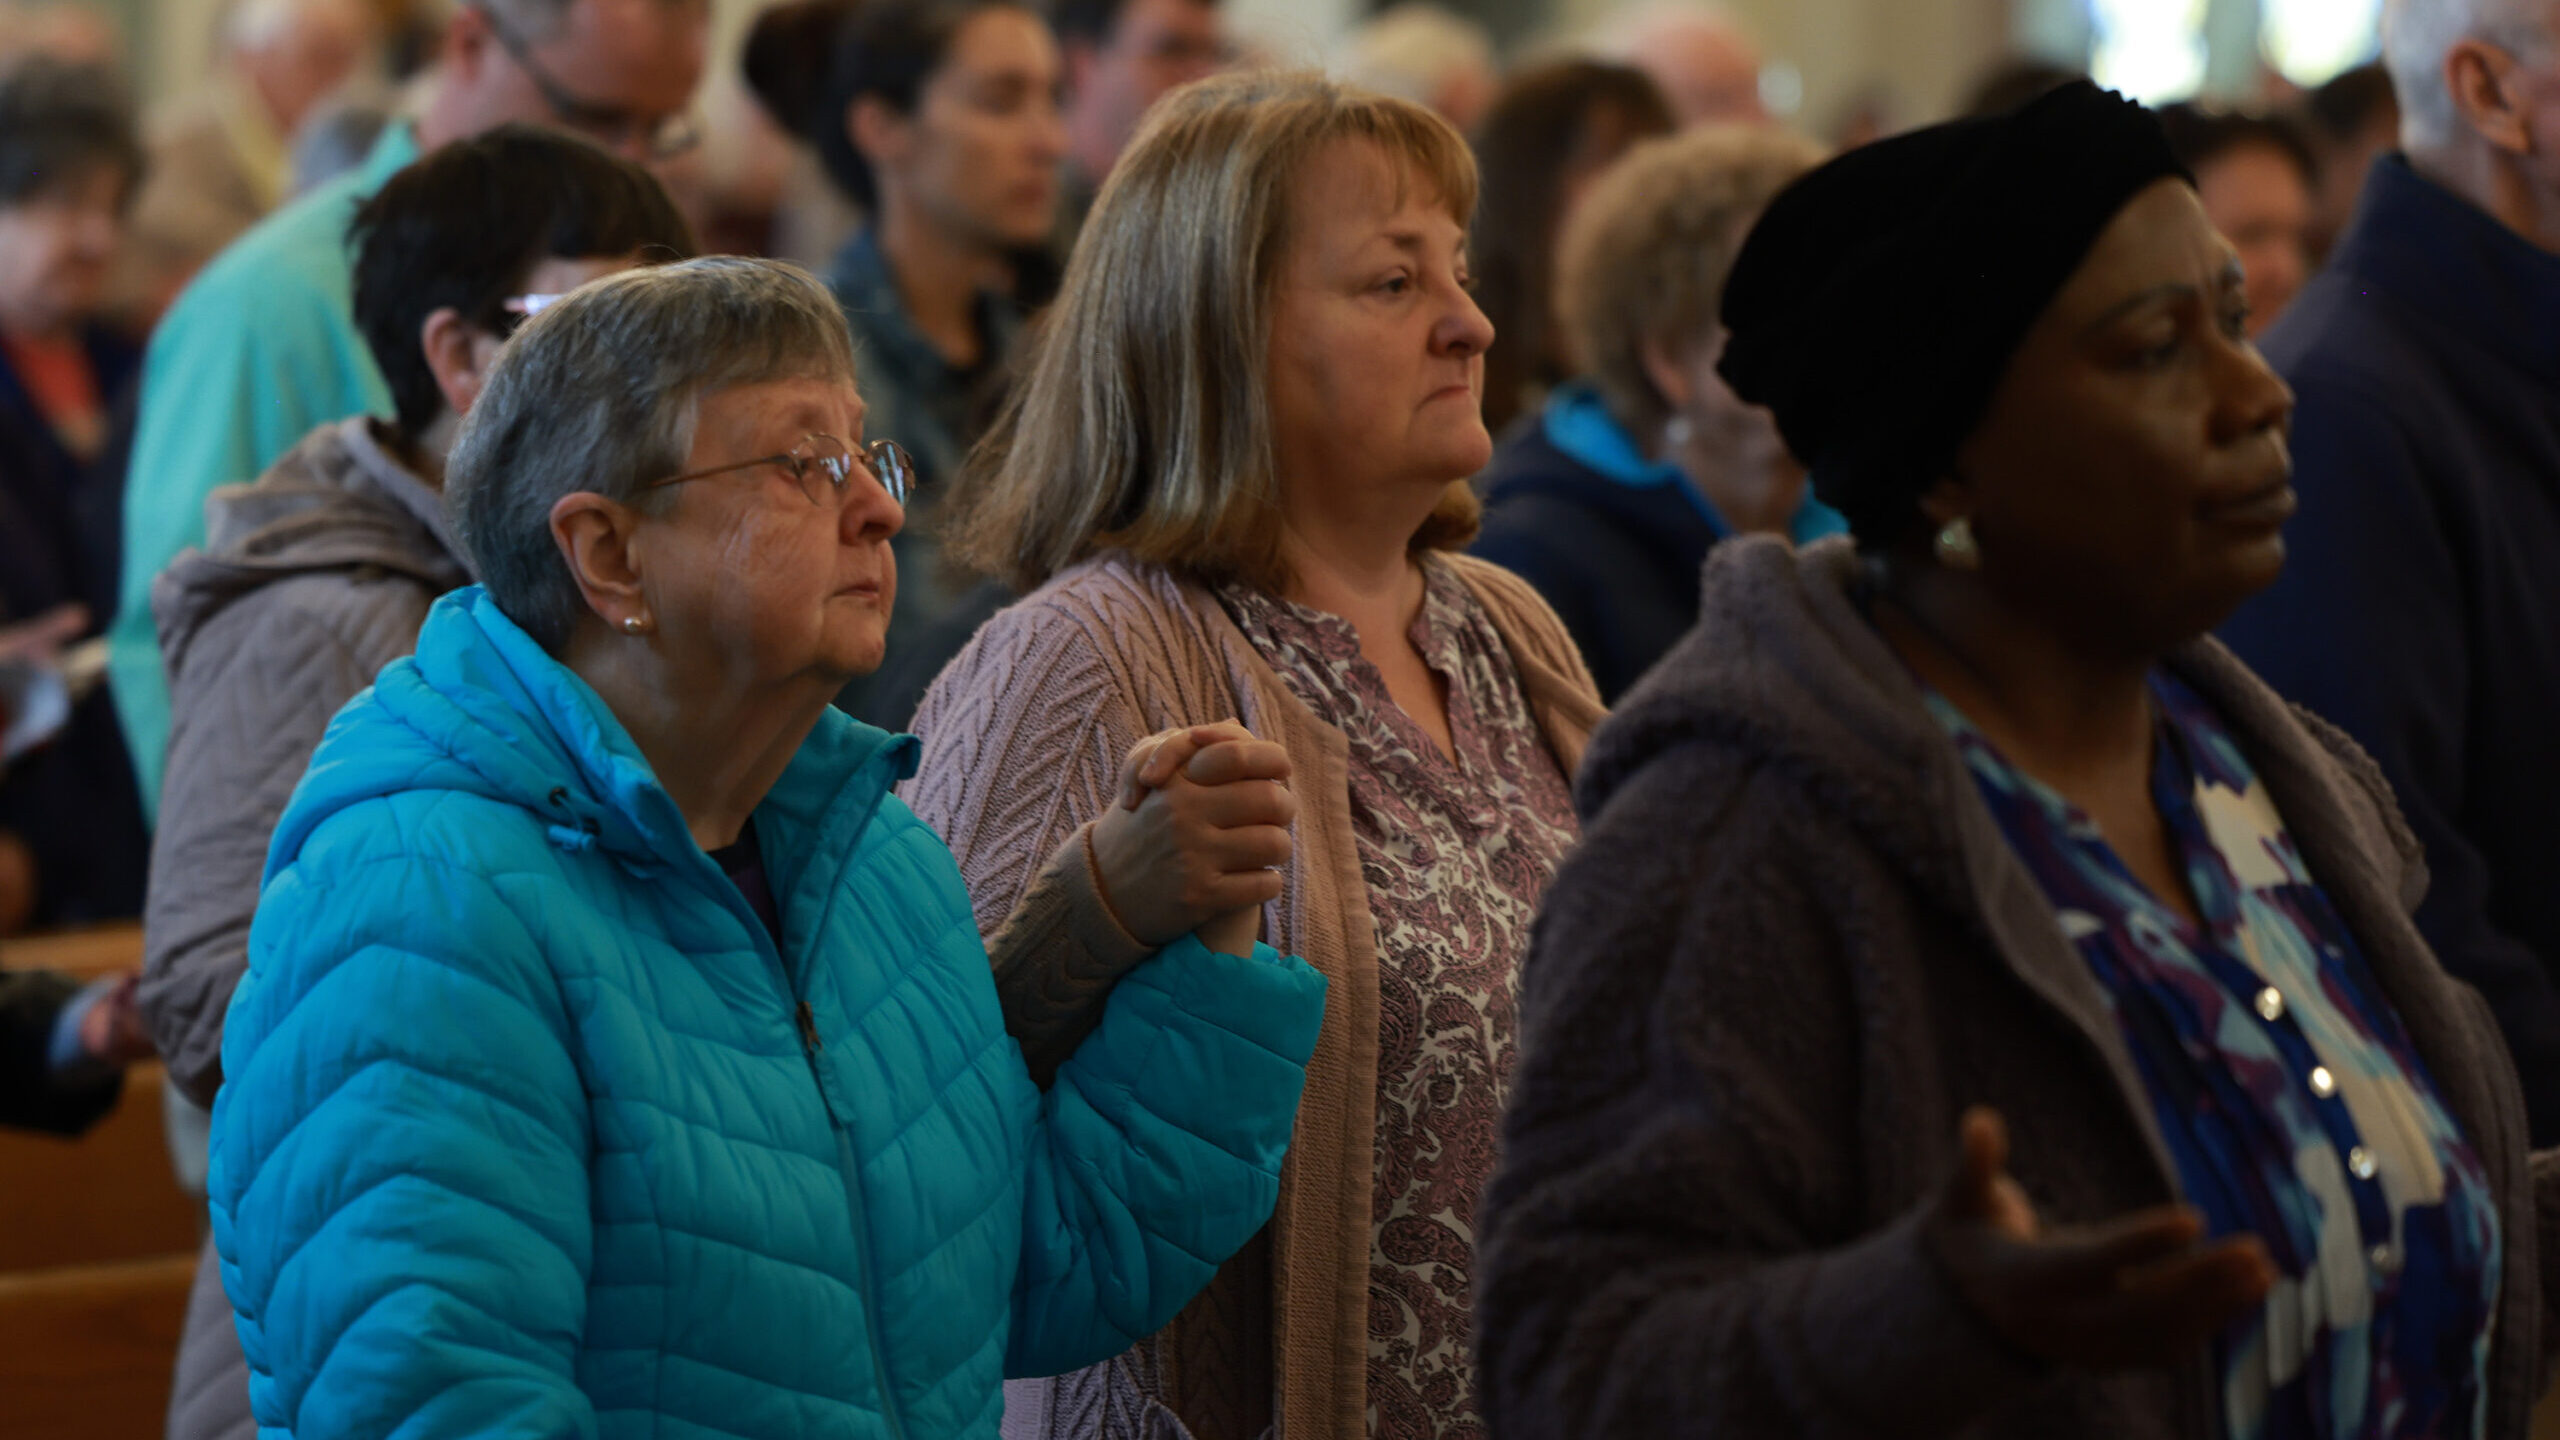 Parishioners pray during the Holy Cross Church service on October 29, 2023 in Lewiston, Maine. Duri...